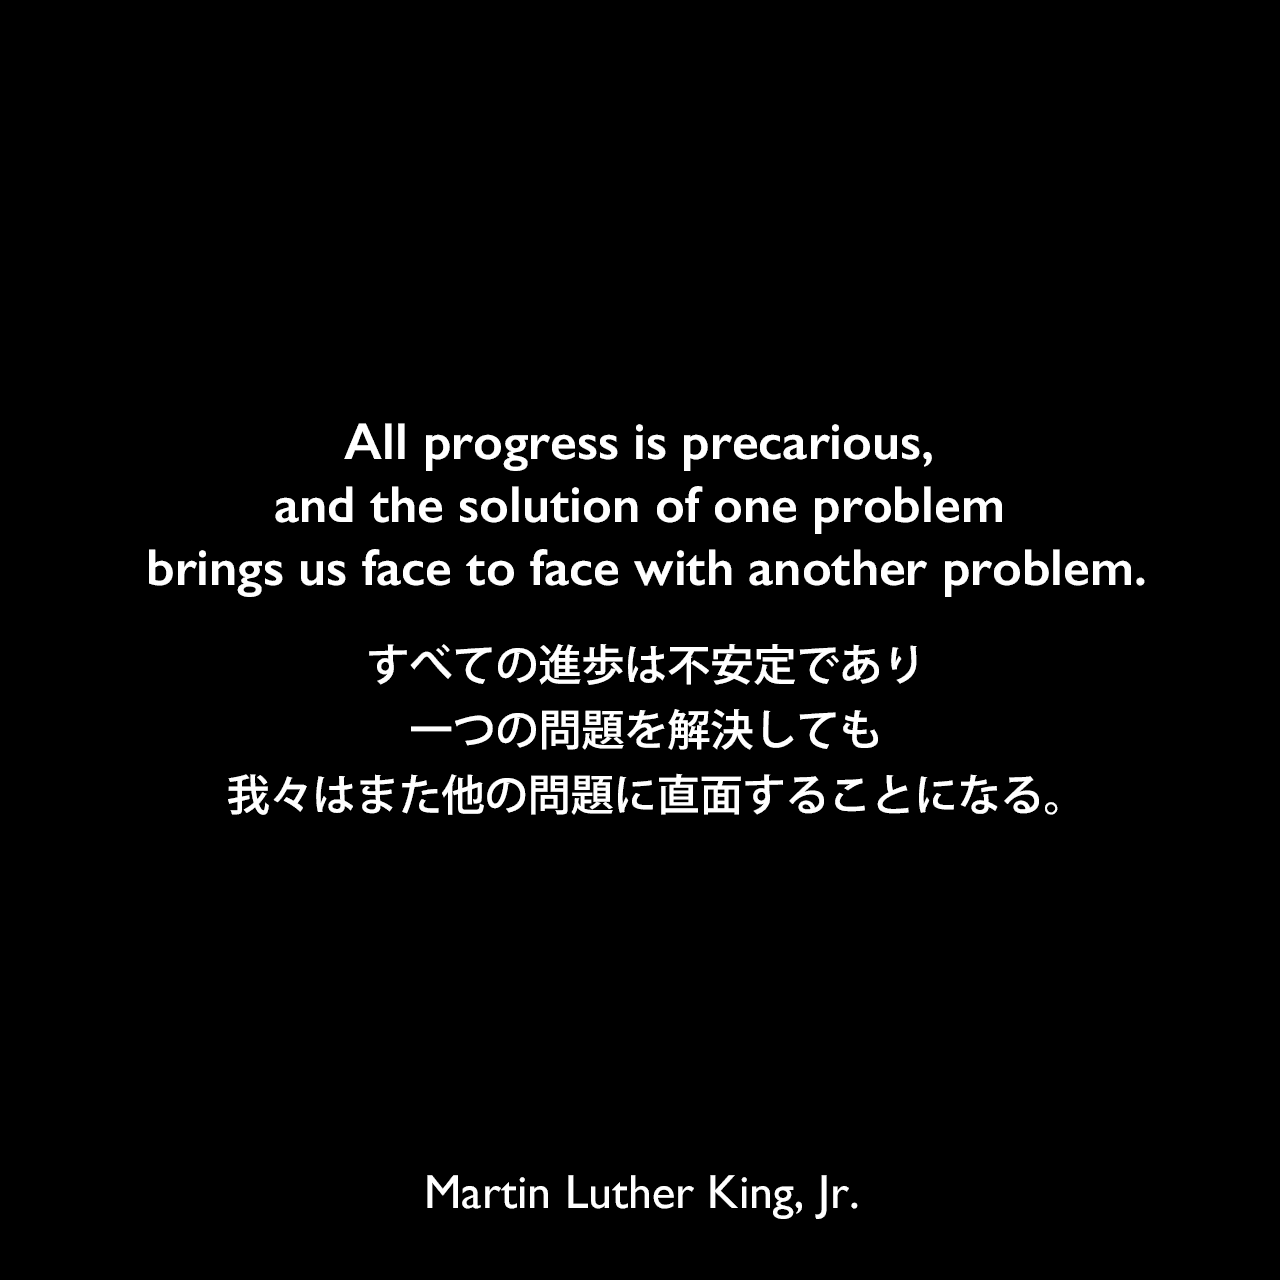 All progress is precarious, and the solution of one problem brings us face to face with another problem.すべての進歩は不安定であり、一つの問題を解決しても、我々はまた他の問題に直面することになる。Martin Luther King, Jr.